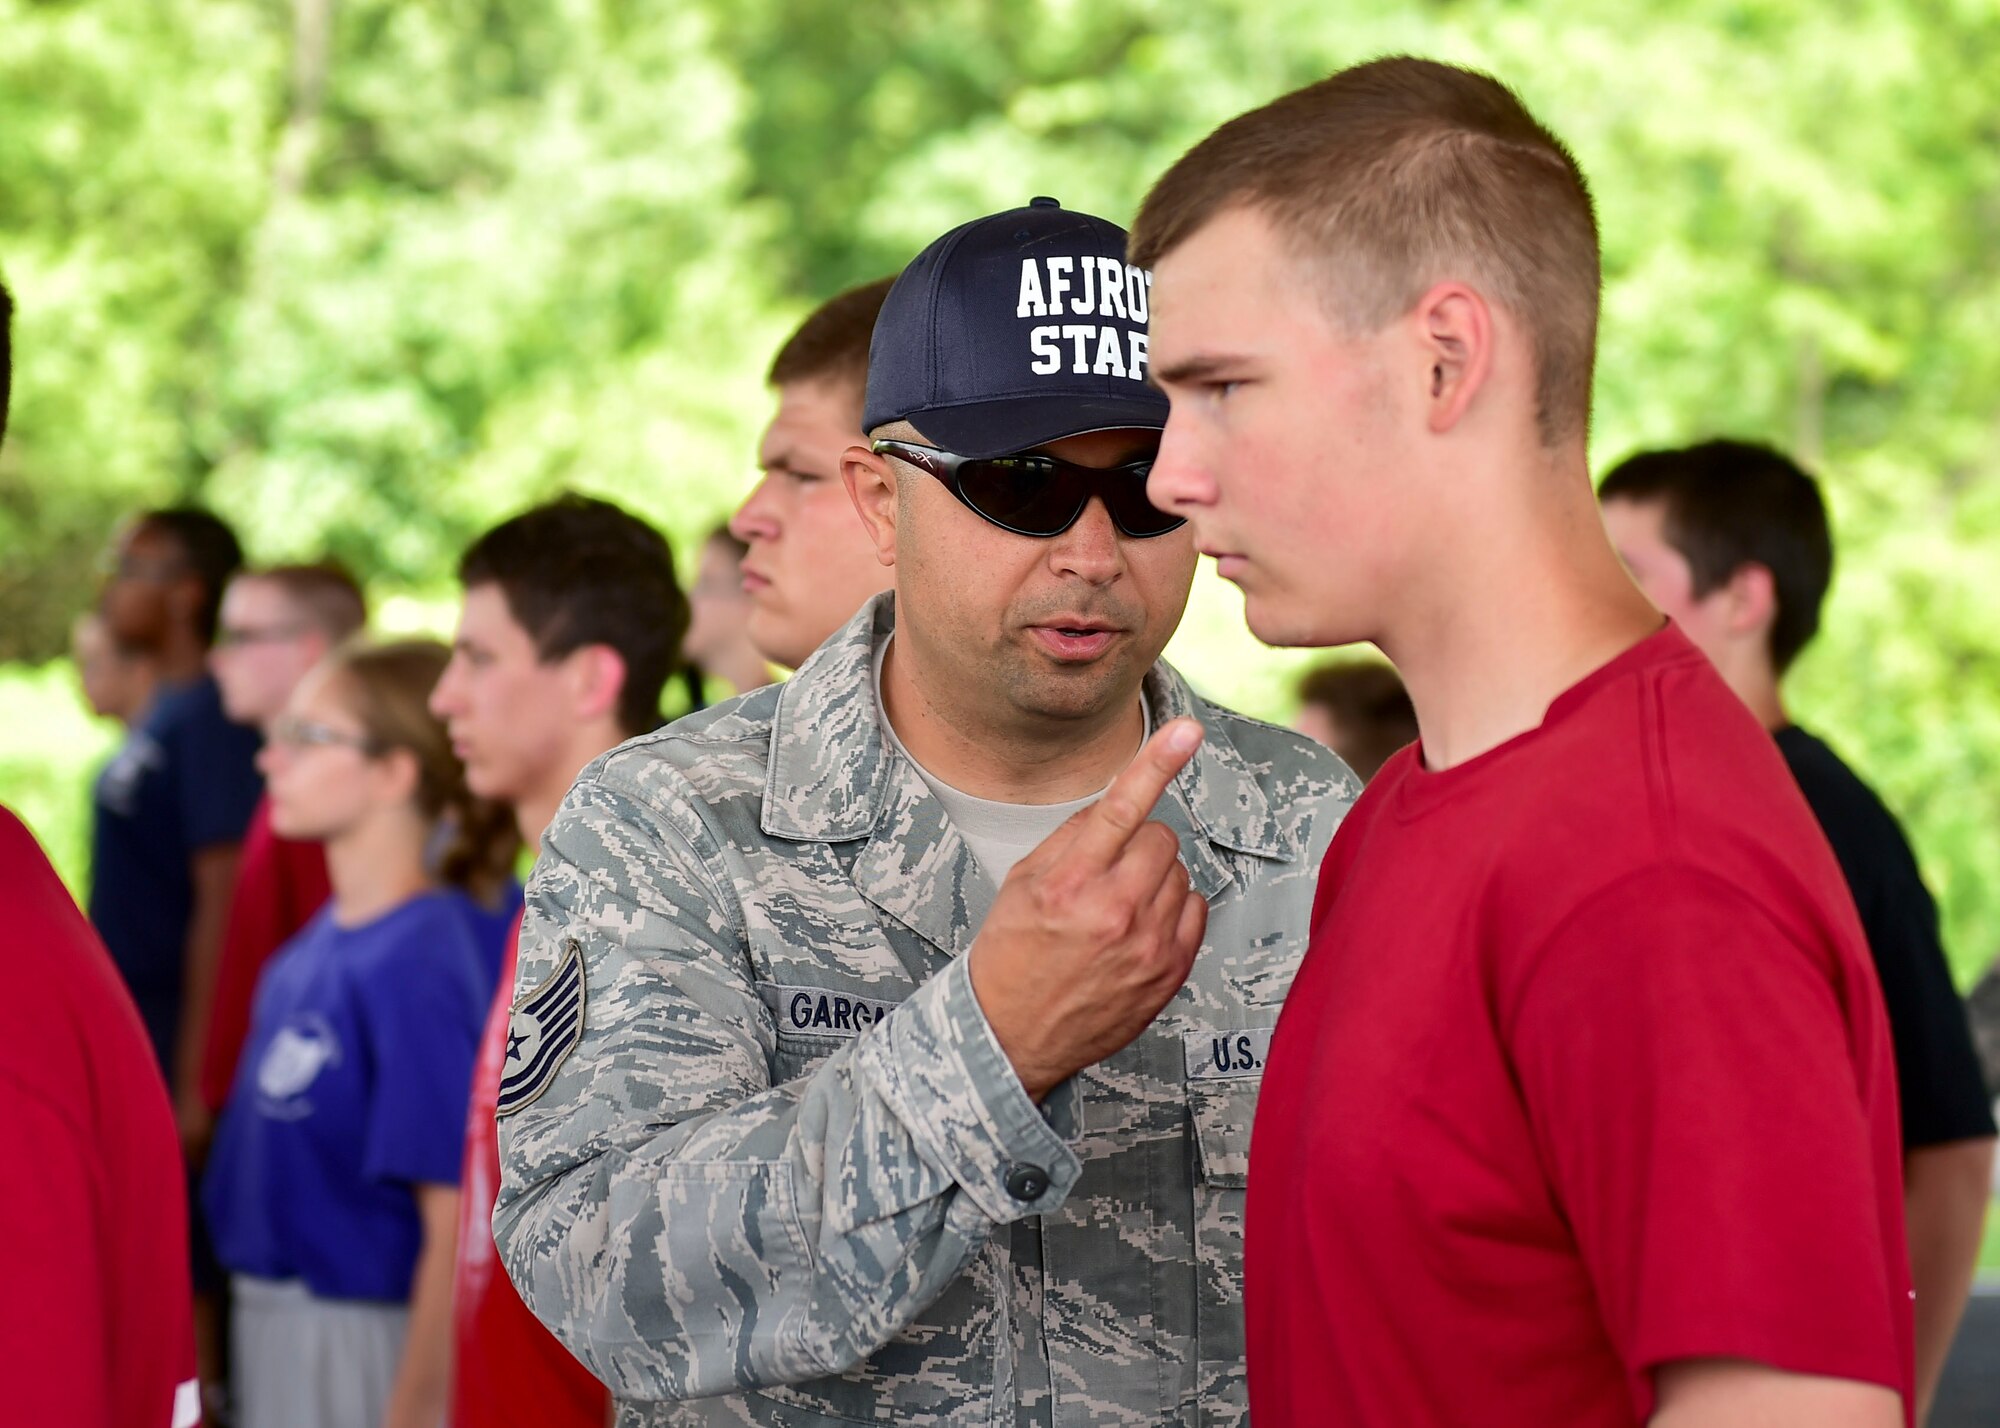 U.S. Air Force Citizen Airman Tech. Sgt. Florin Gargarita, a member of the 910th Maintenance Squadron, directs a Junior Reserve Officer Training Corps (JROTC) cadet to assume correct posture during an encampment here, June 21, 2017. The encampment, facilitated by 910th Airlift Wing Airmen, provided a five-day experience teaching military skills and replicating aspects of Basic Military Training. JROTC is a program sponsored by the Armed Forces for high school students across the country. (U.S. Air Force photo/Eric White)